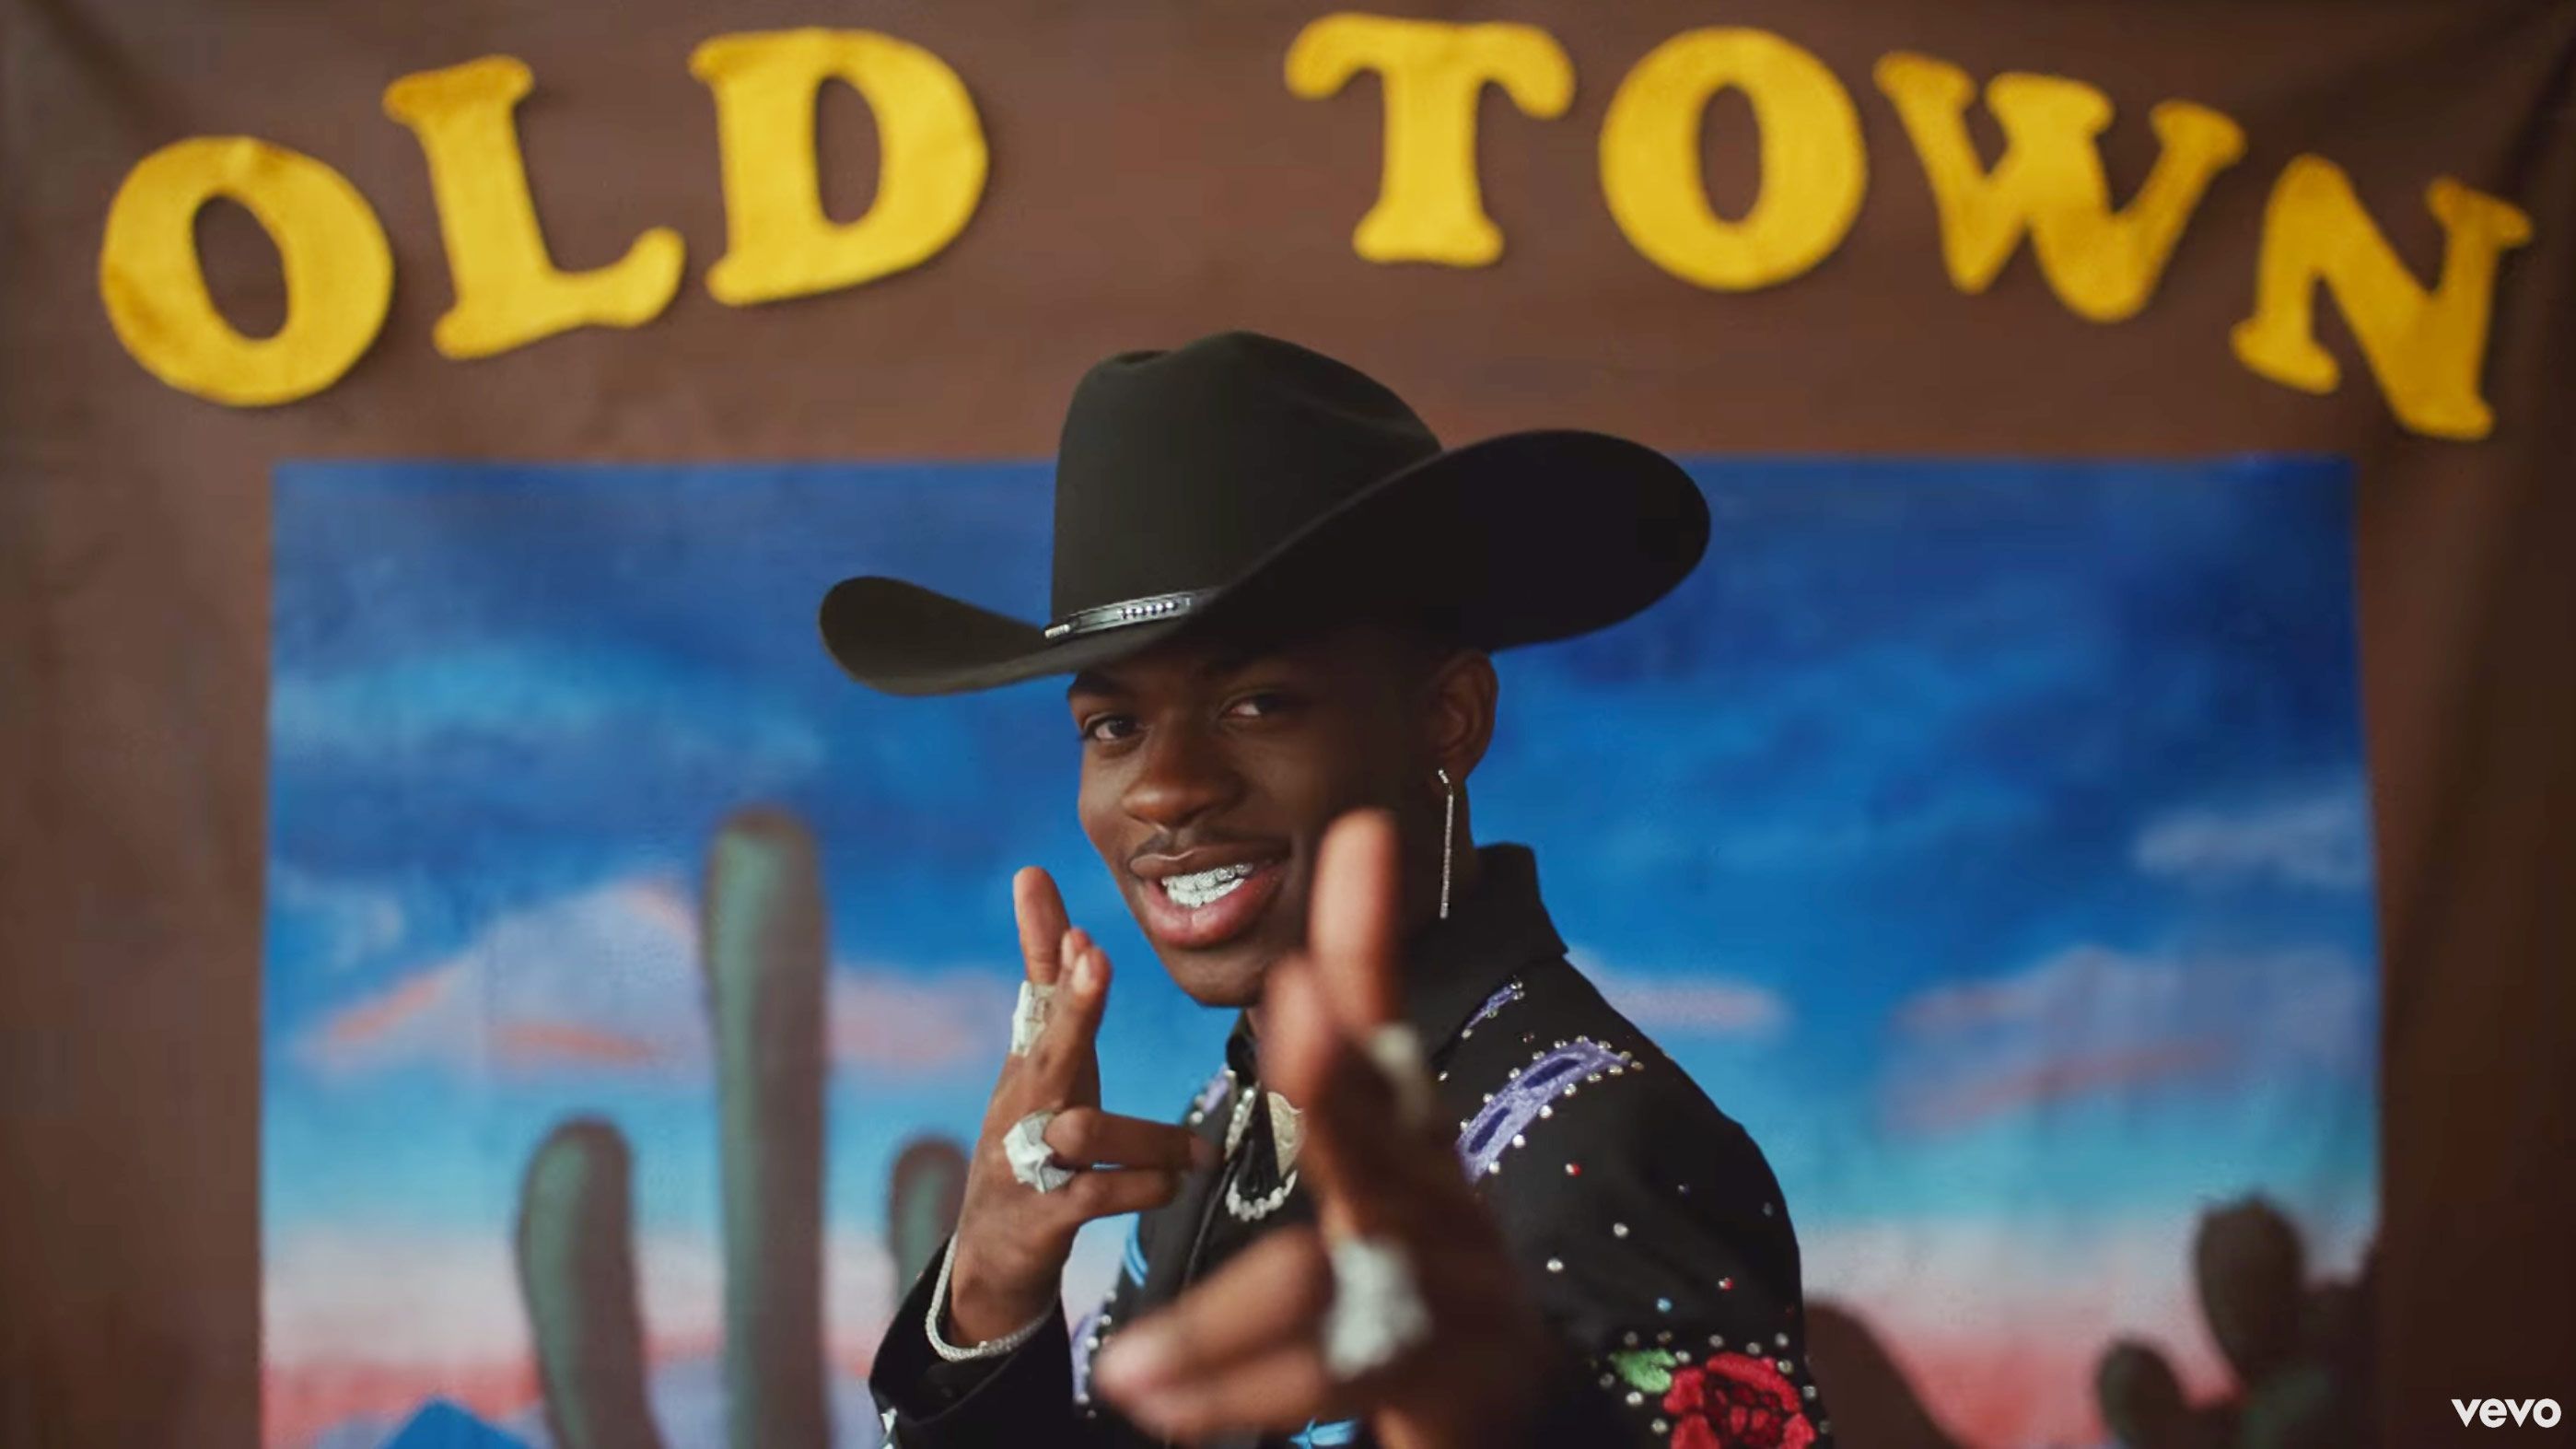 Sex Blue Shakira Video - Every Yeehaw Look From the 'Old Town Road' Video